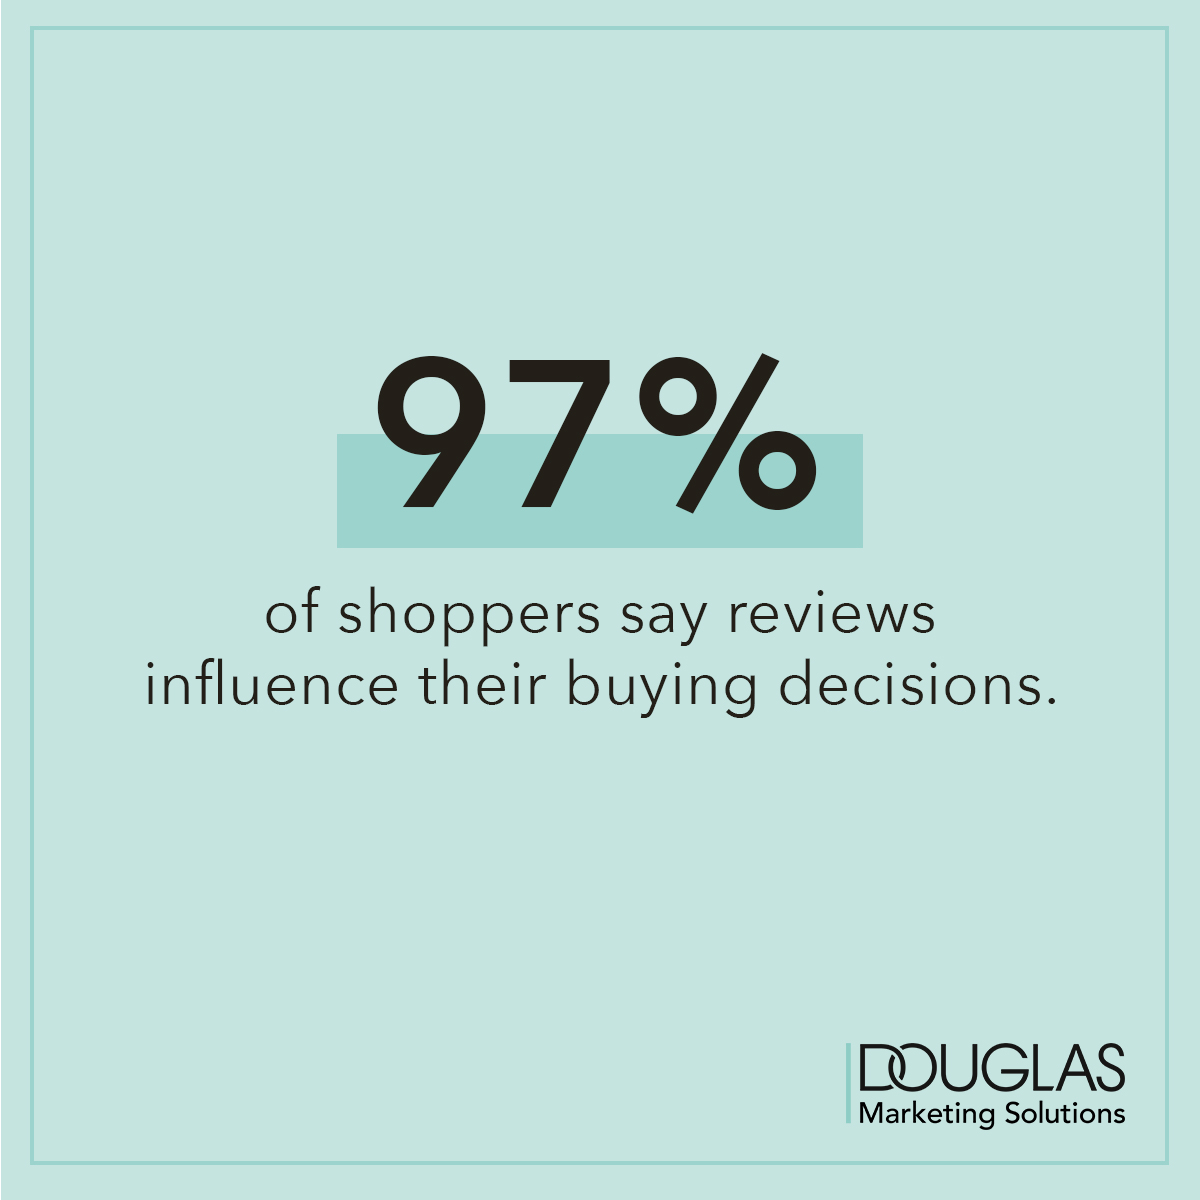 97% of shoppers say reviews influence their buying decisions.